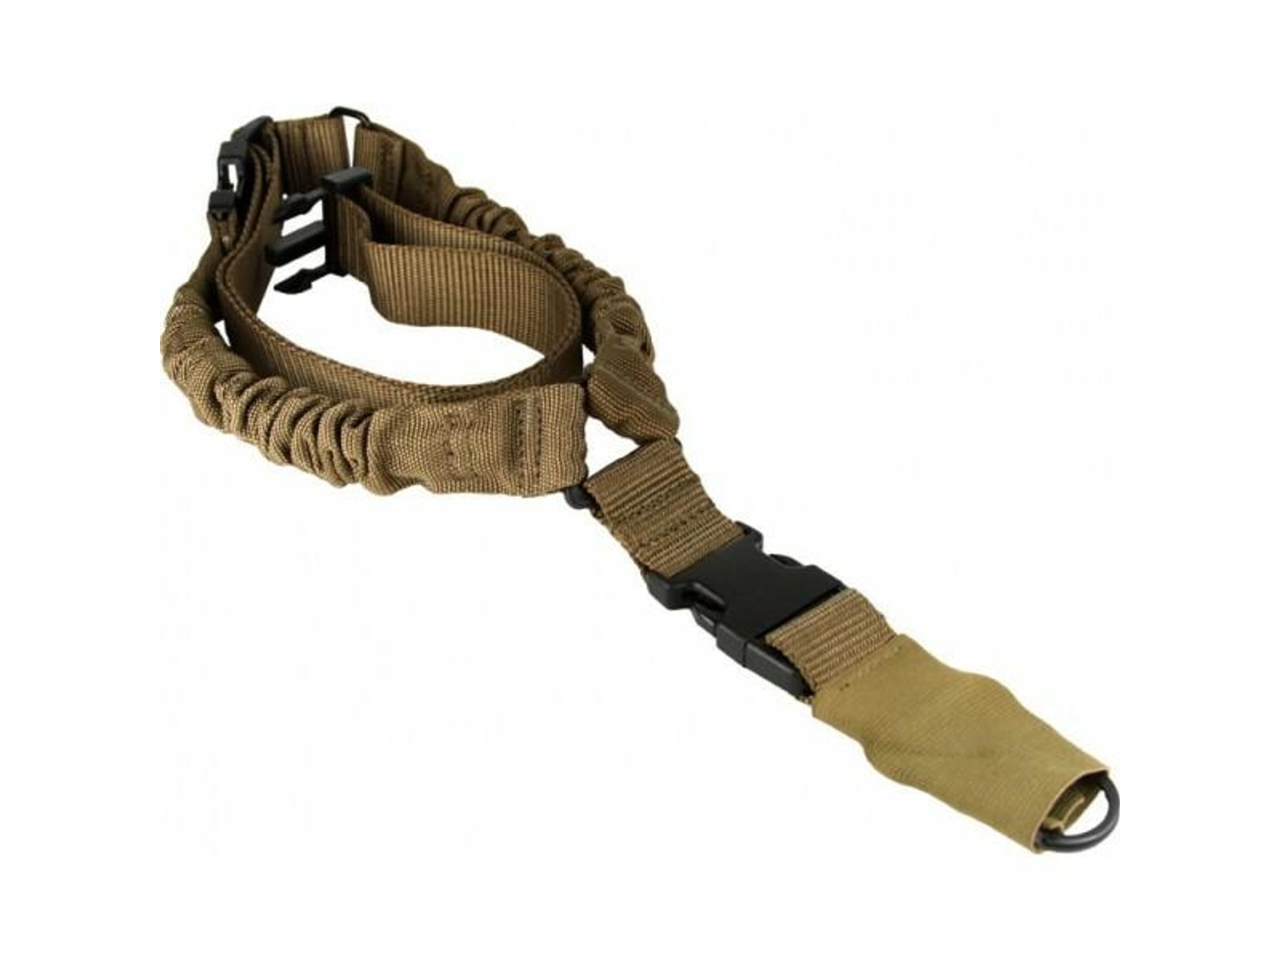 Aim Sports One Point Bungee Rifle Sling, Tan